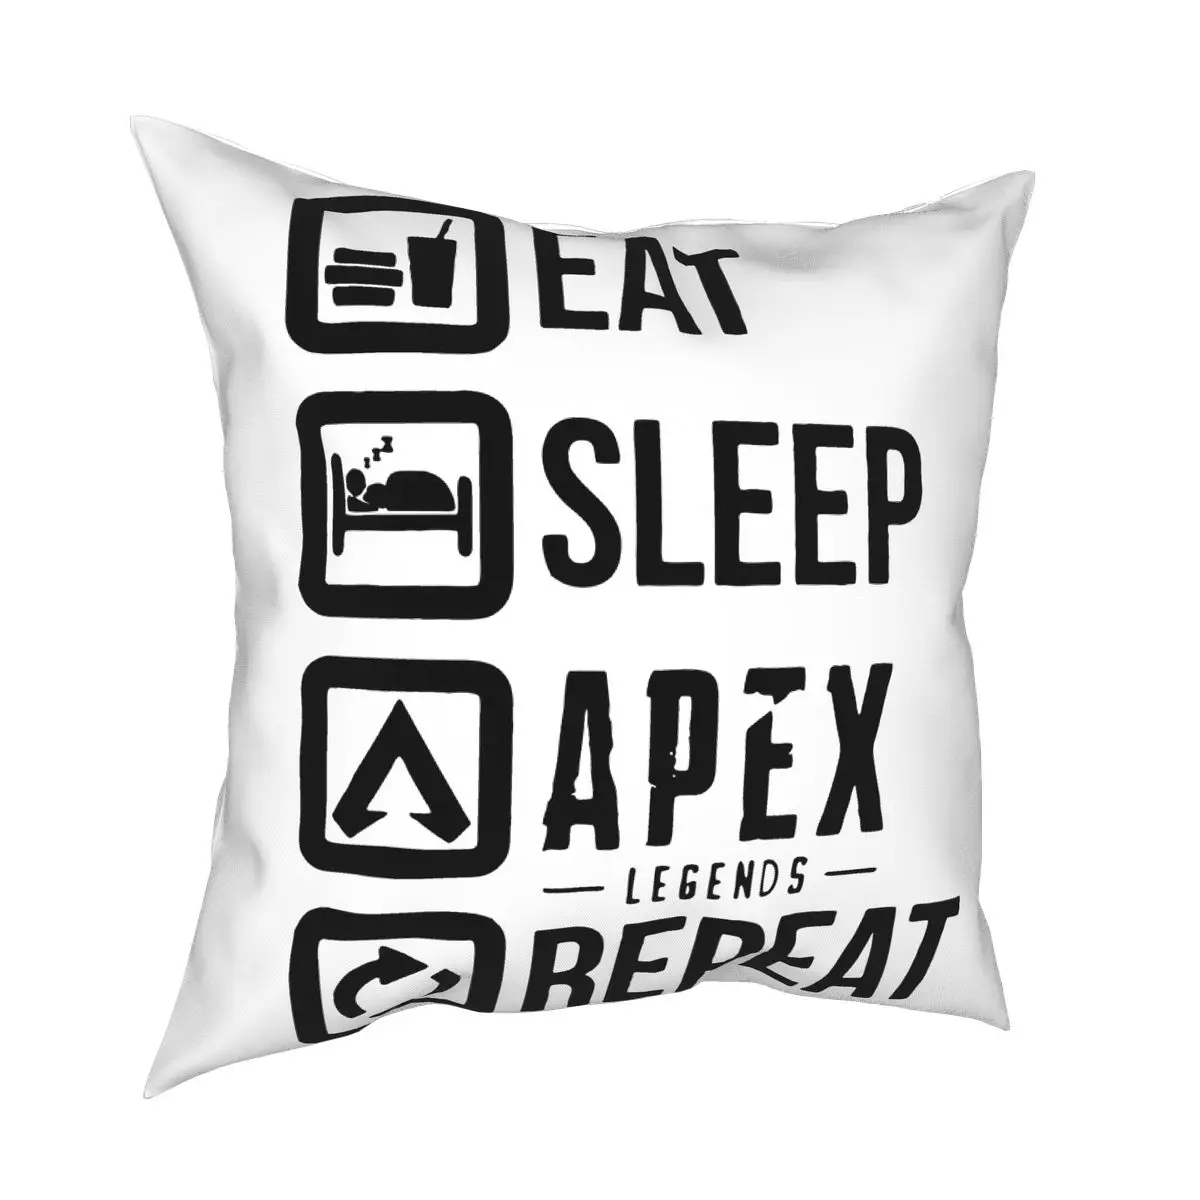 

Eat Sleep Apex Legends Repeat Square Pillow Case Polyester Decorative Pillow Pathfinder Bangalore 80s Game Casual Pillowcase